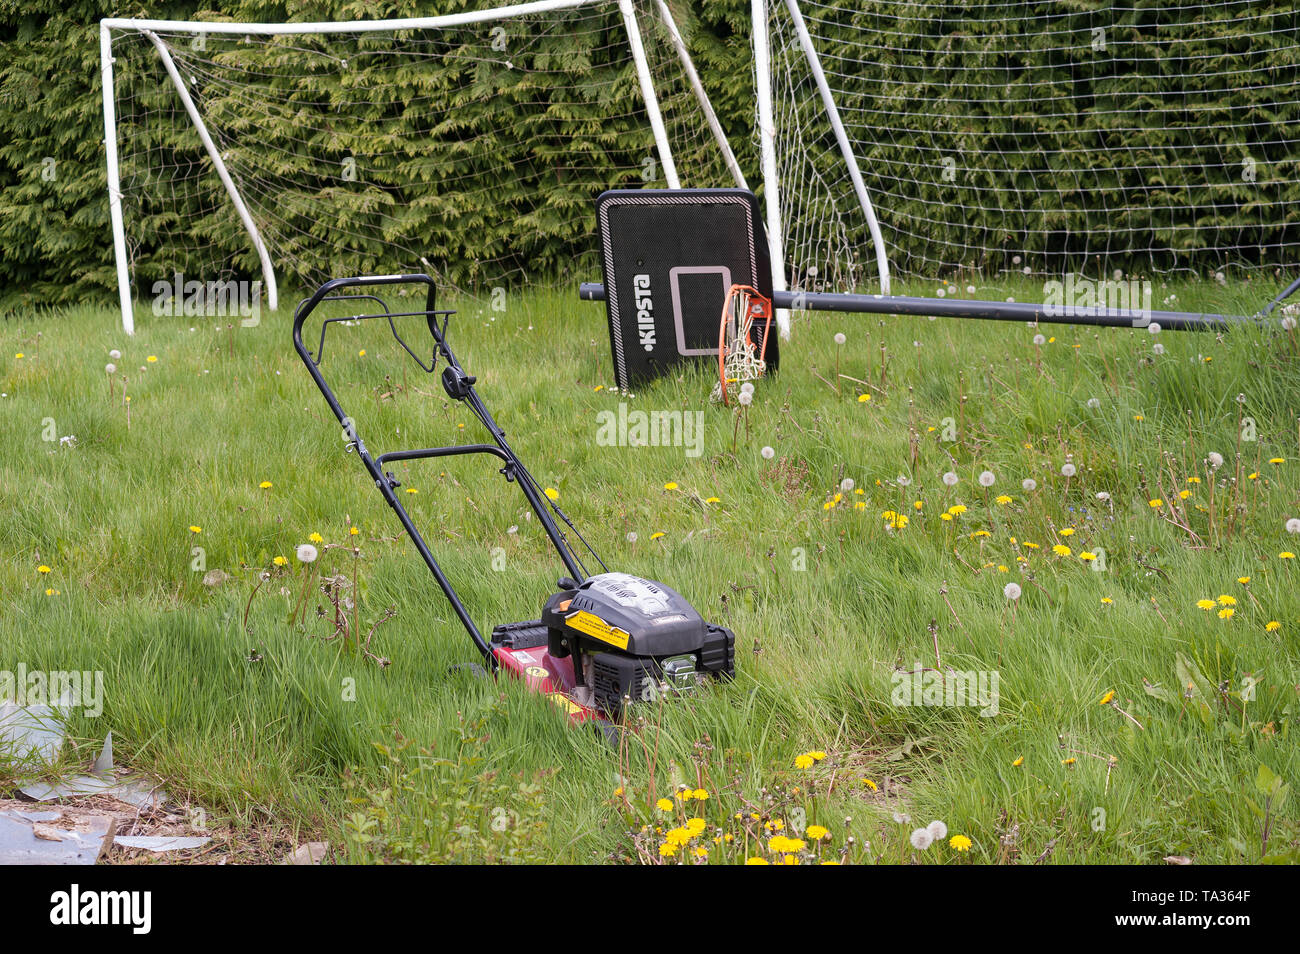 Broken lawnmower or too busy a working life to cut the grass in summer so lawn is over grown, neglected, becoming a meadow over holiday Stock Photo